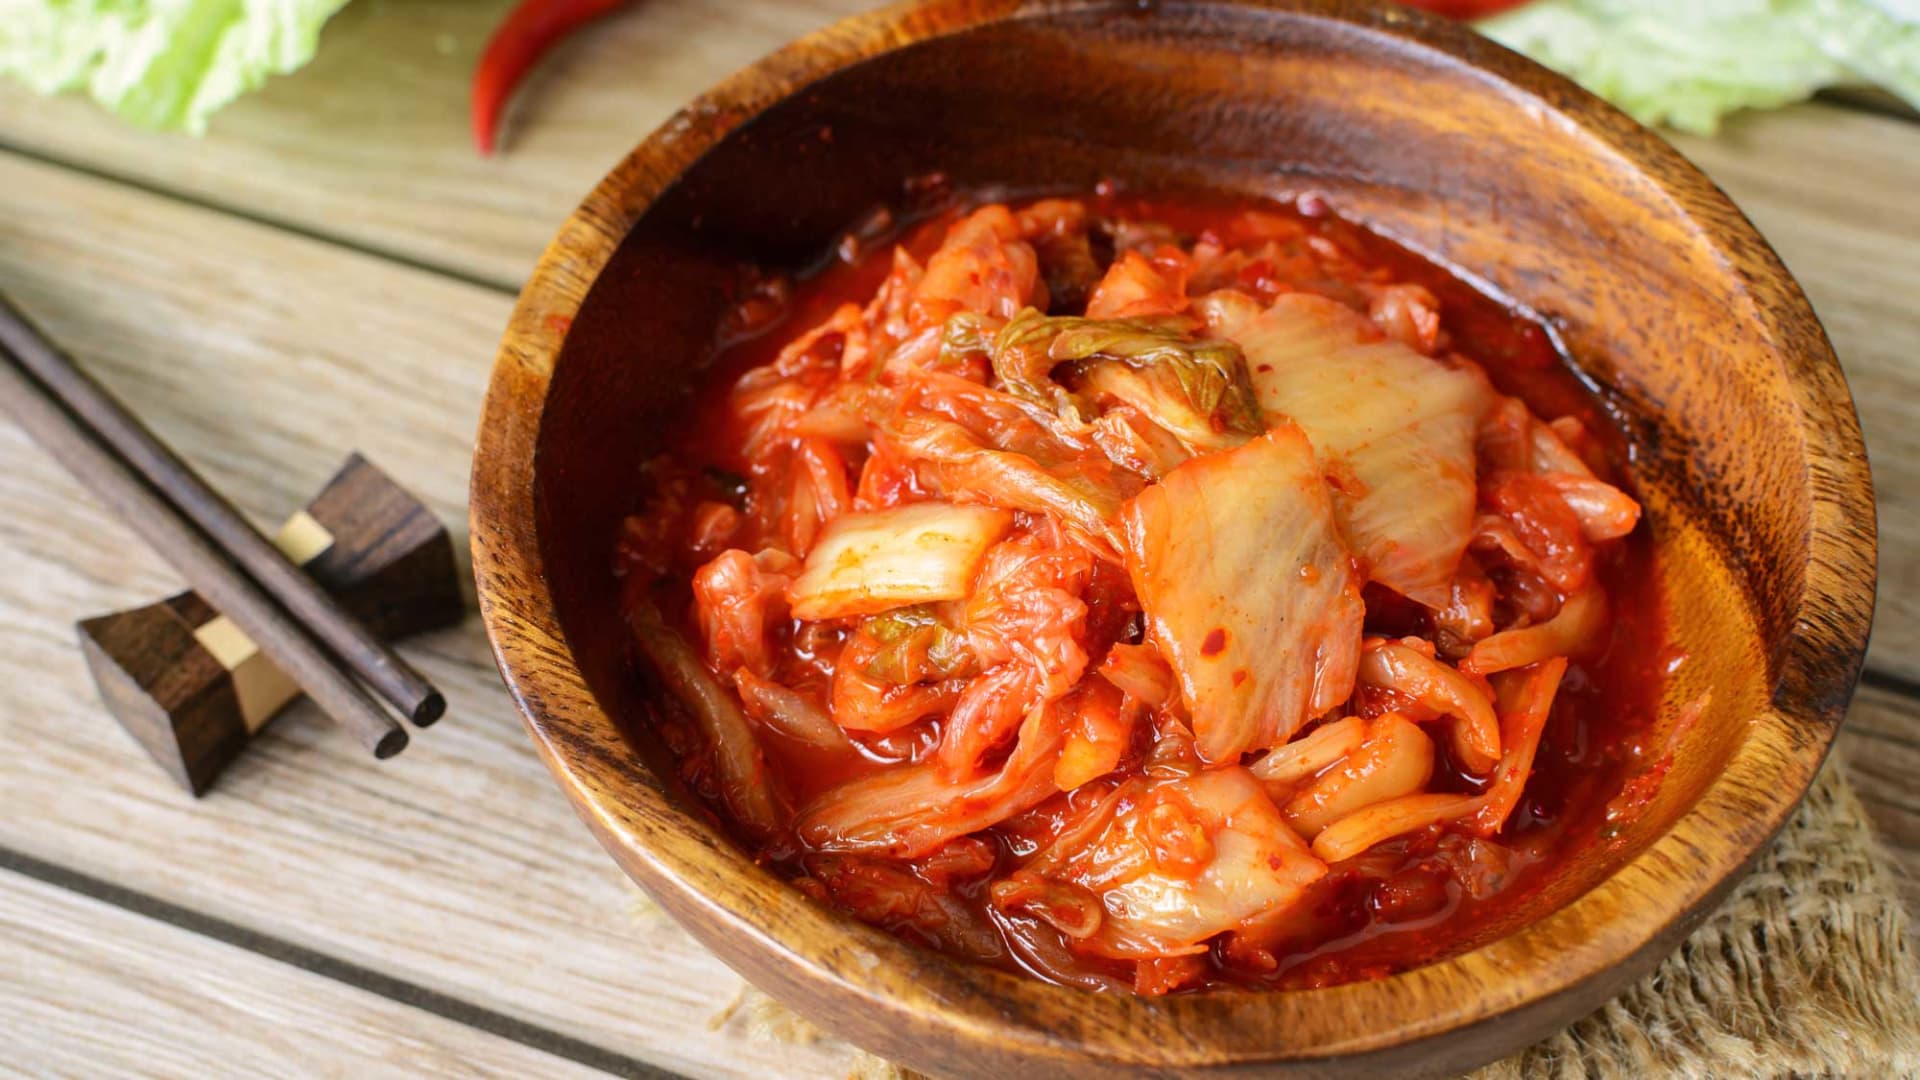 In the wake of bitcoin’s new highs, South Korea’s ‘kimchi premium’ is in the spotlight again